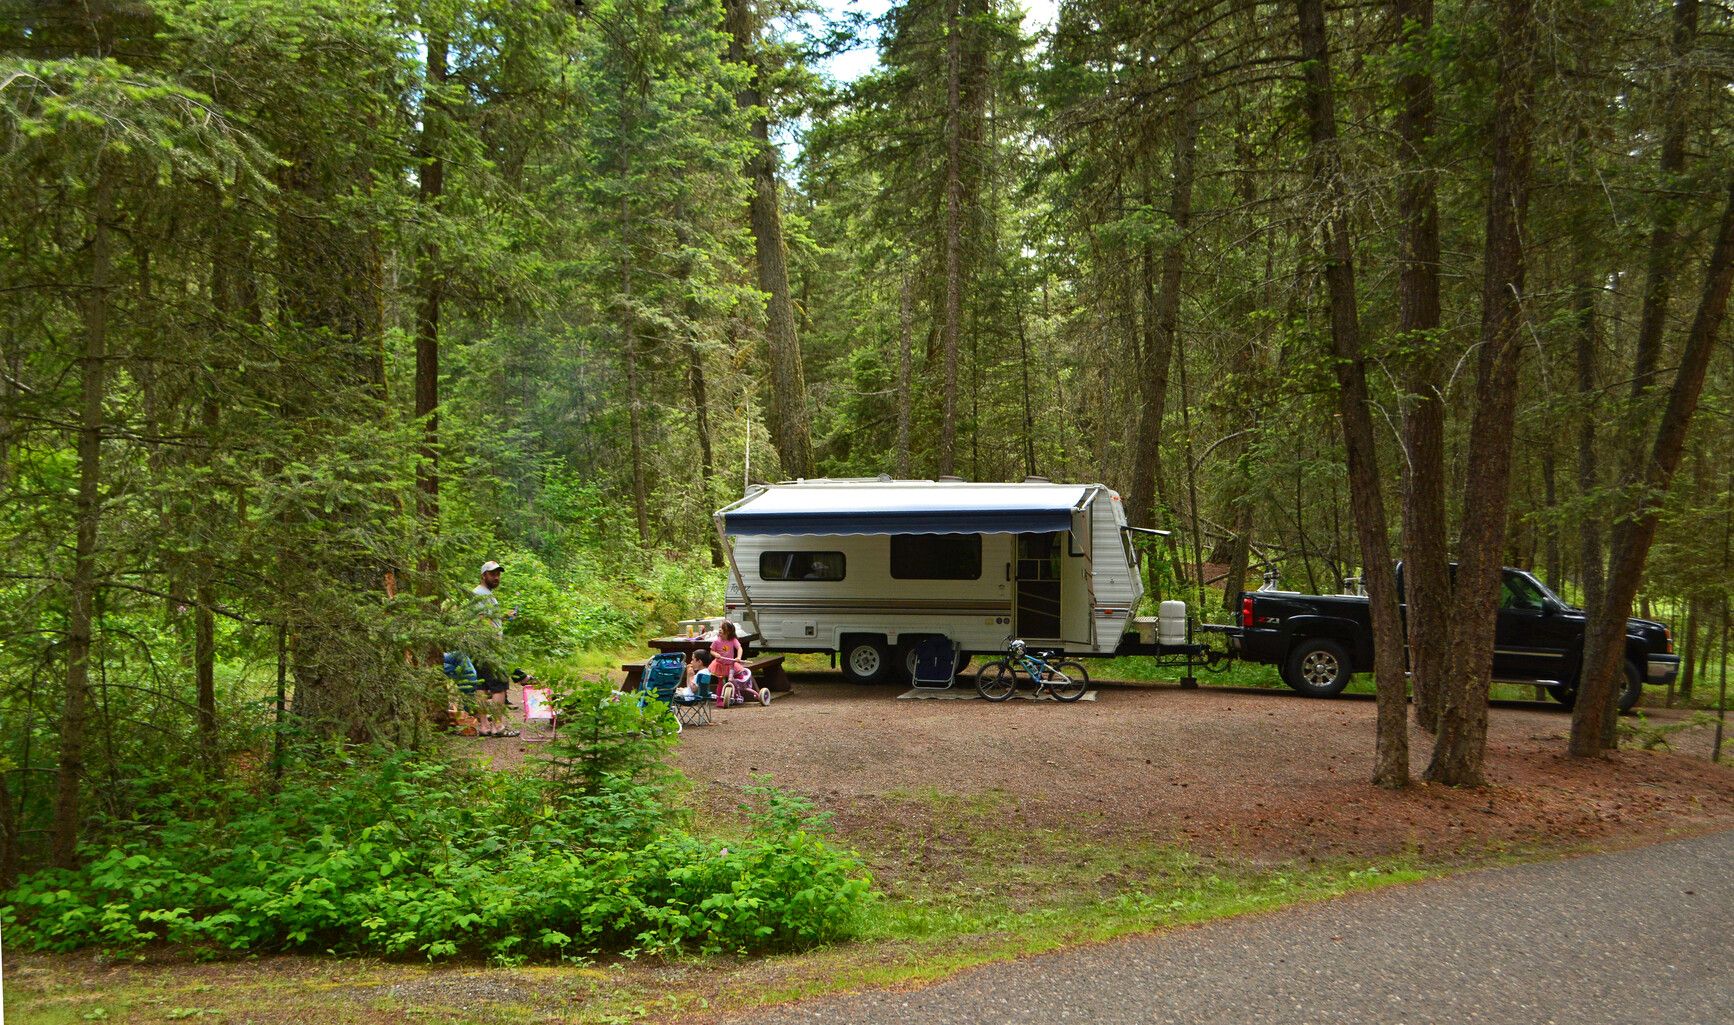 Lac La Hache Park offers large treed campsites perfect for a family vacation.